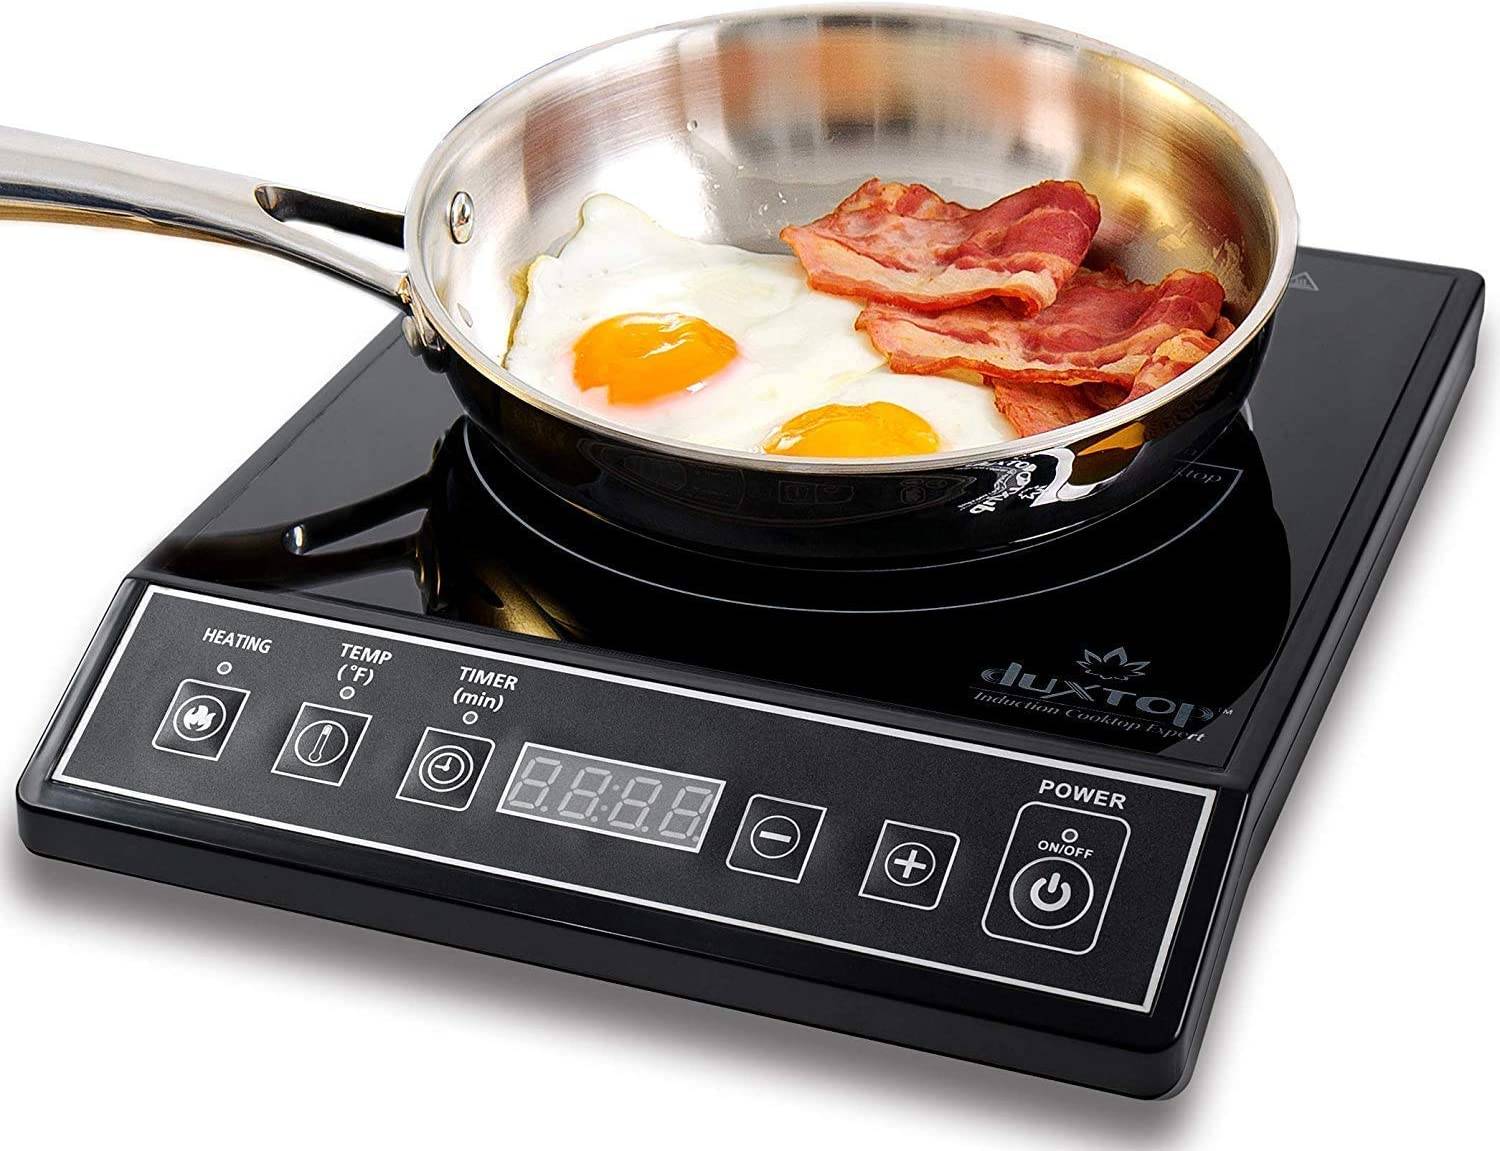 Duxtop Induction Cook Top 10 Month Review 